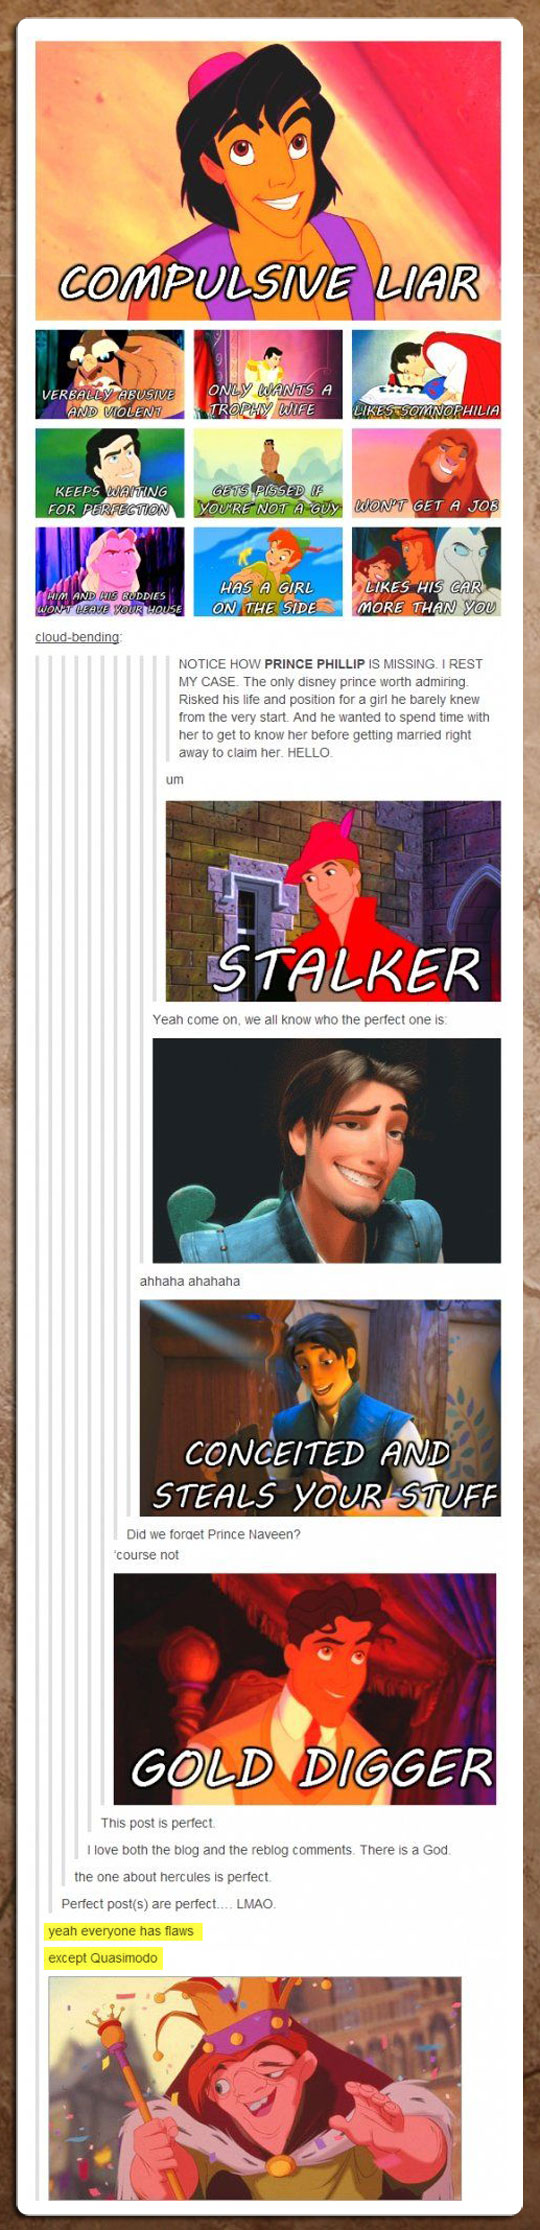 Disney prince’s are such scumbags…